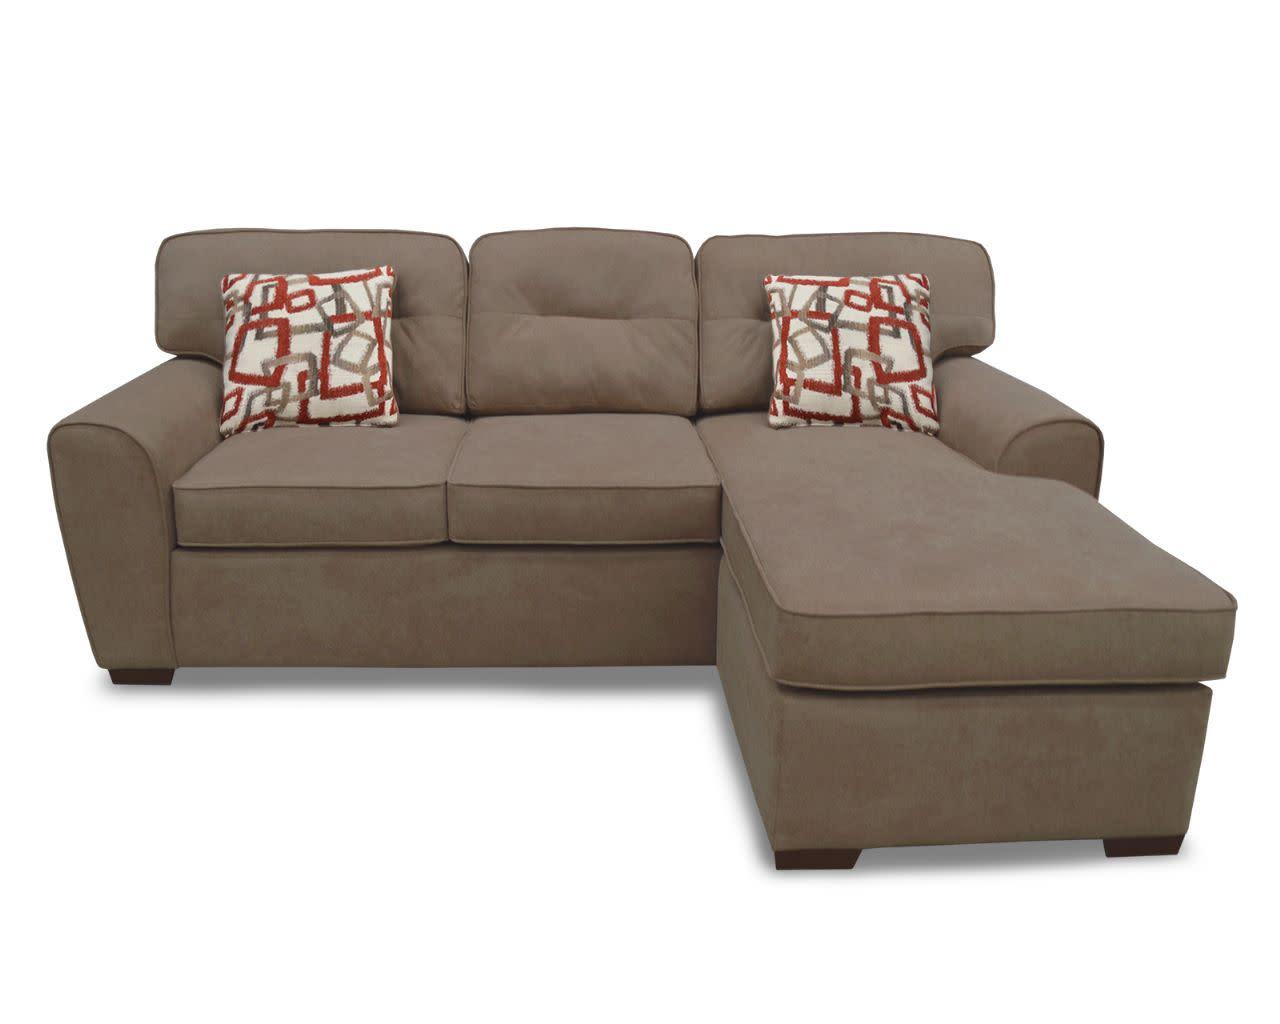 Chase Brown Sofa Chaise